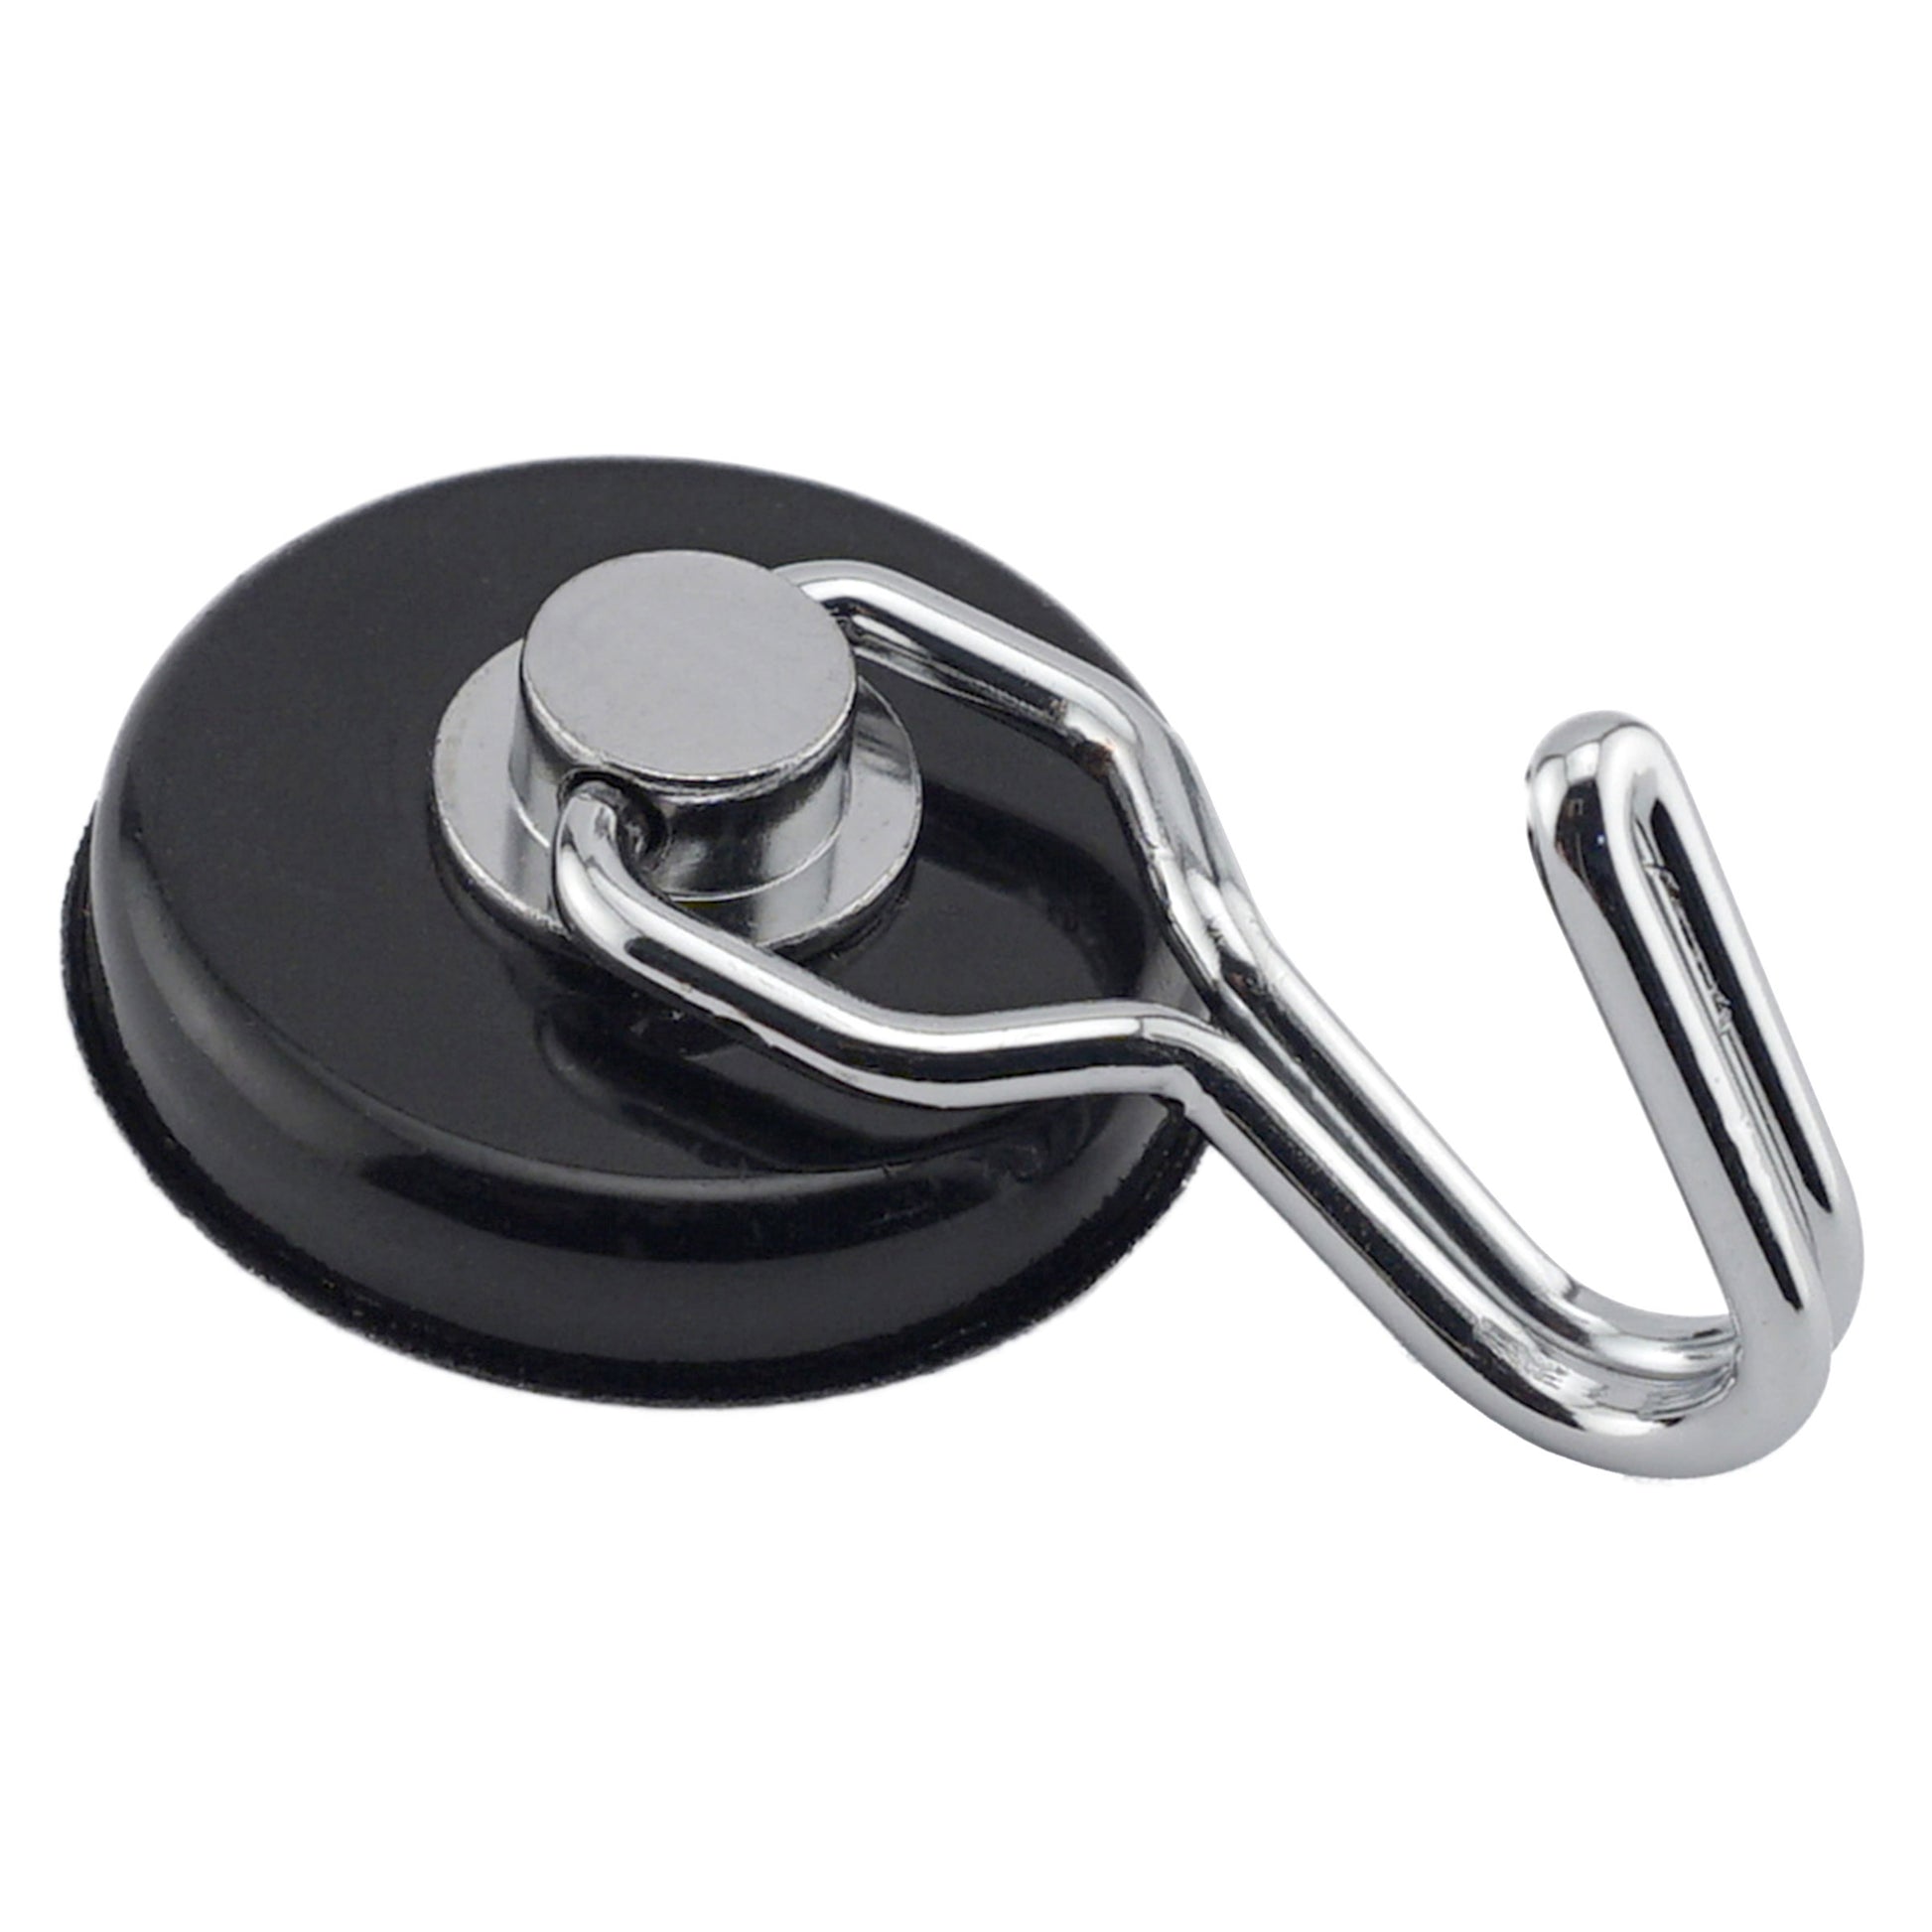 Load image into Gallery viewer, 07580 Neodymium Rotating and Swinging Magnetic Hook - 45 Degree Angle View